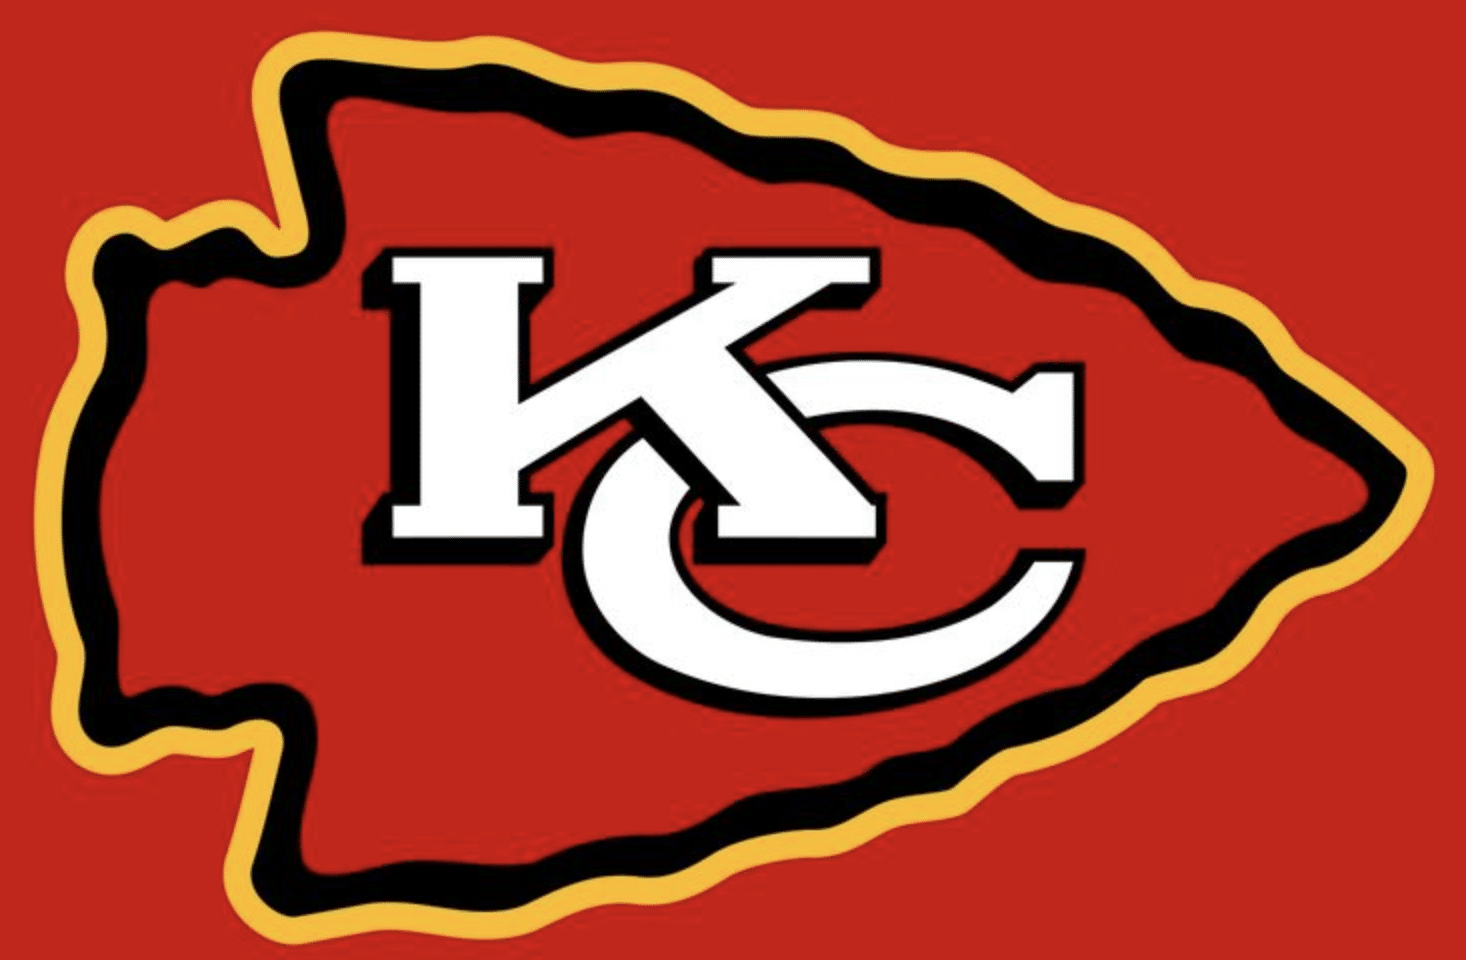 Kansas City Chiefs Injury Travis Kelce Ruled Out Kansas City Chiefs were tipping plays